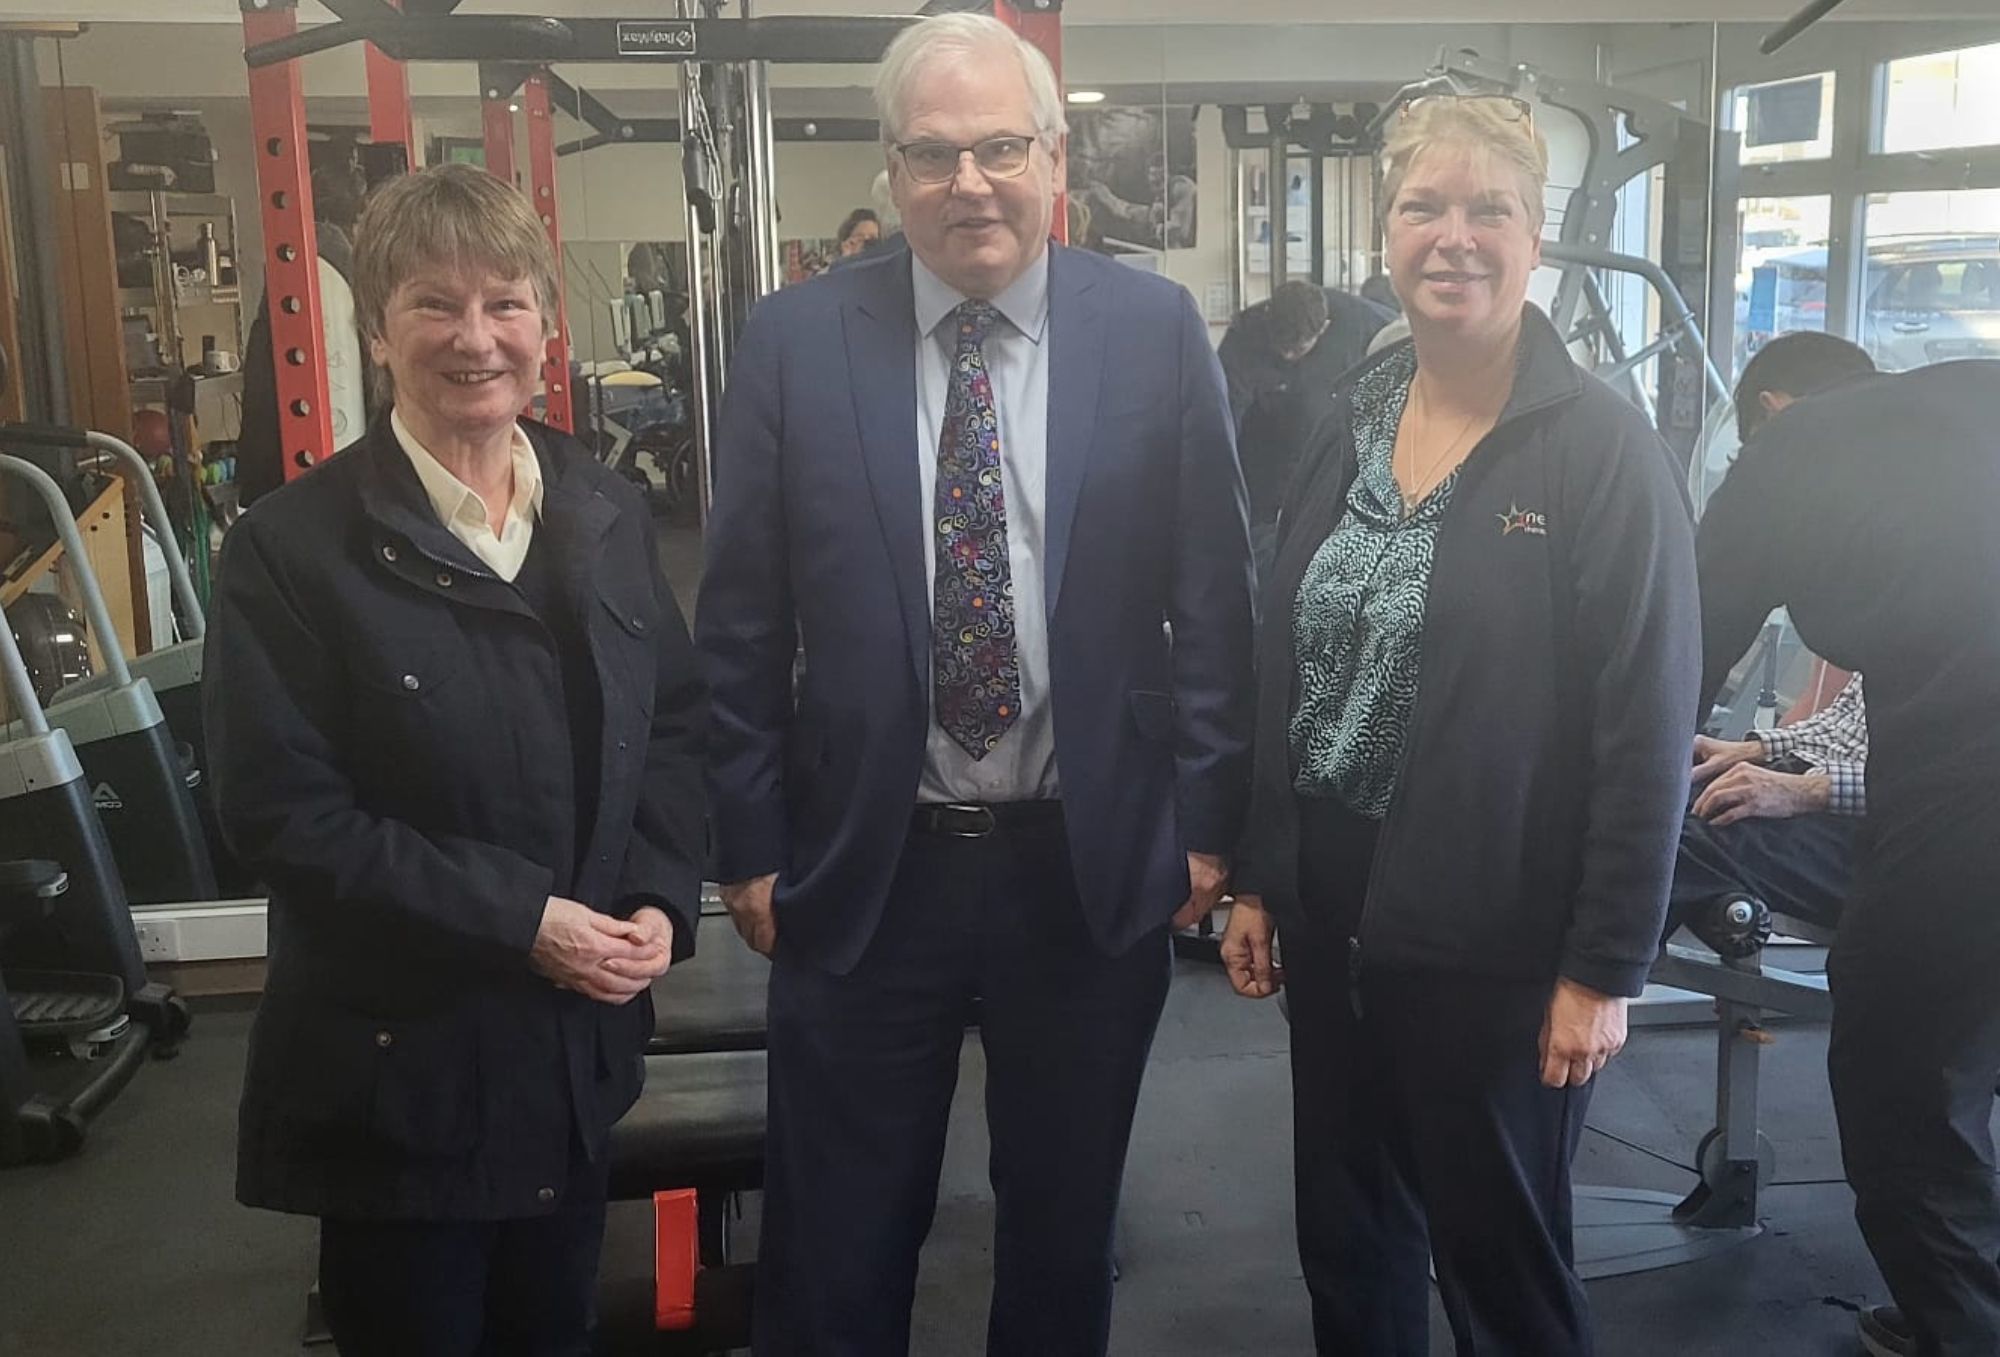 Lorraine Dodd, chair of trustees, Mark Tami MP and Jane Johnston-Cree, chief executive officer at the Neuro Therapy Centre in Saltney.